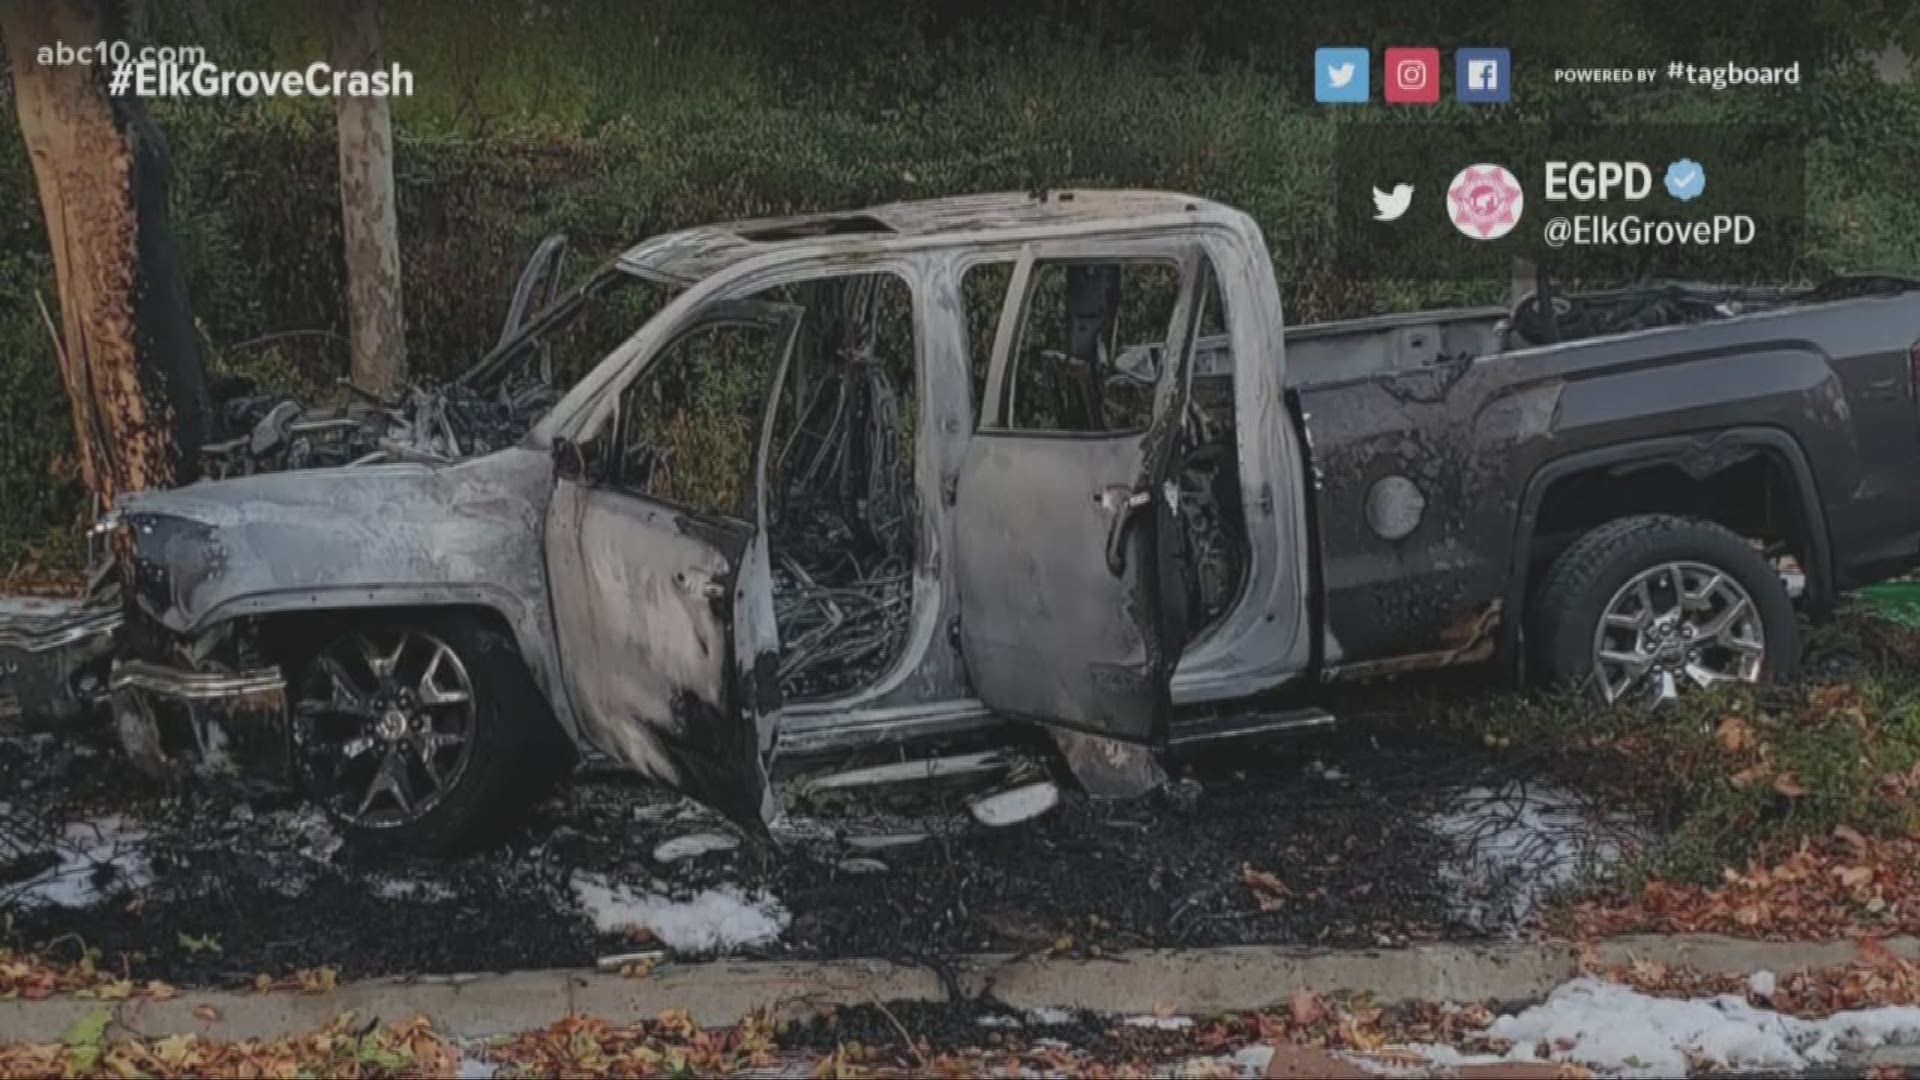 Three people were safely pulled from a burning vehicle by a "good Samaritan" in Elk Grove early Sunday morning, according to the Elk Grove Police Department.